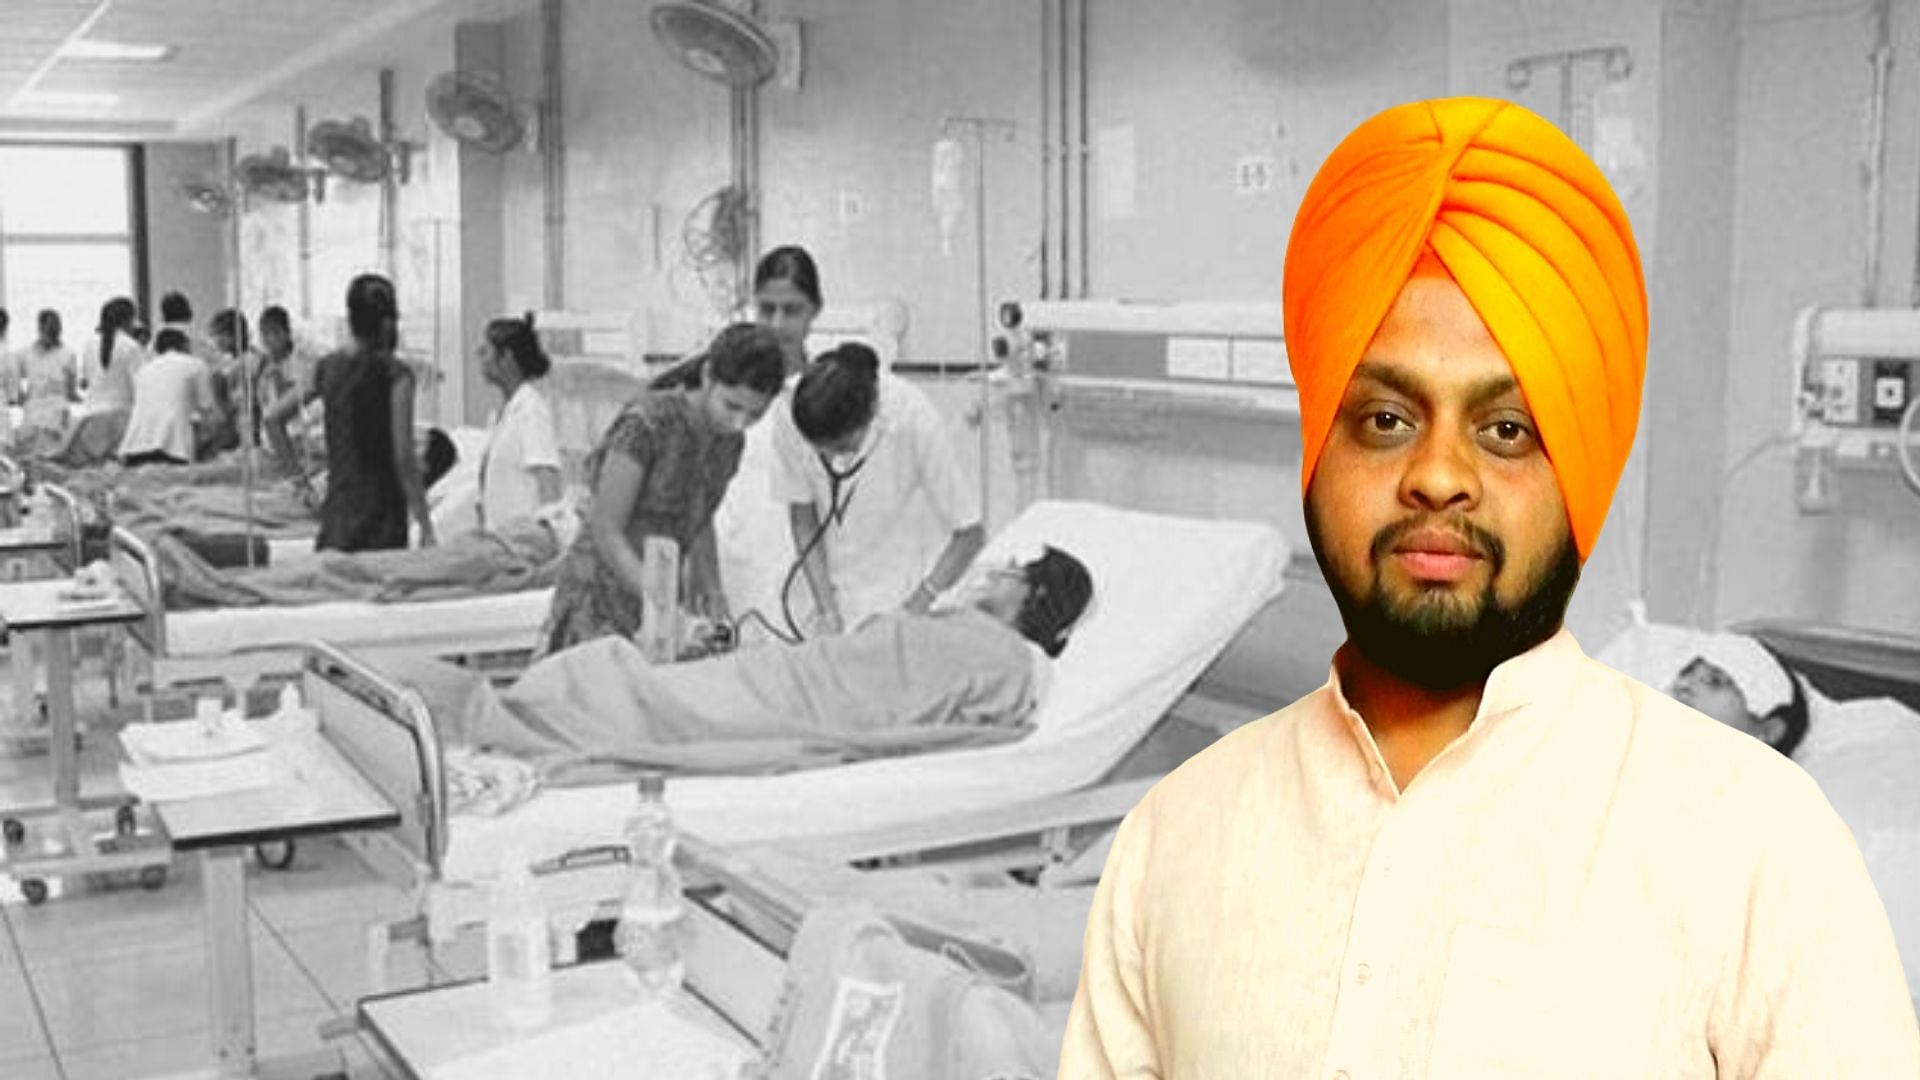 32-year-old Simranjit Singh alias Simar Chandok, who is BJP Yuva Morcha vice president, was booked for sedition by Punjab police for a post on the Ludhiana civil hospital not having any ventilators.